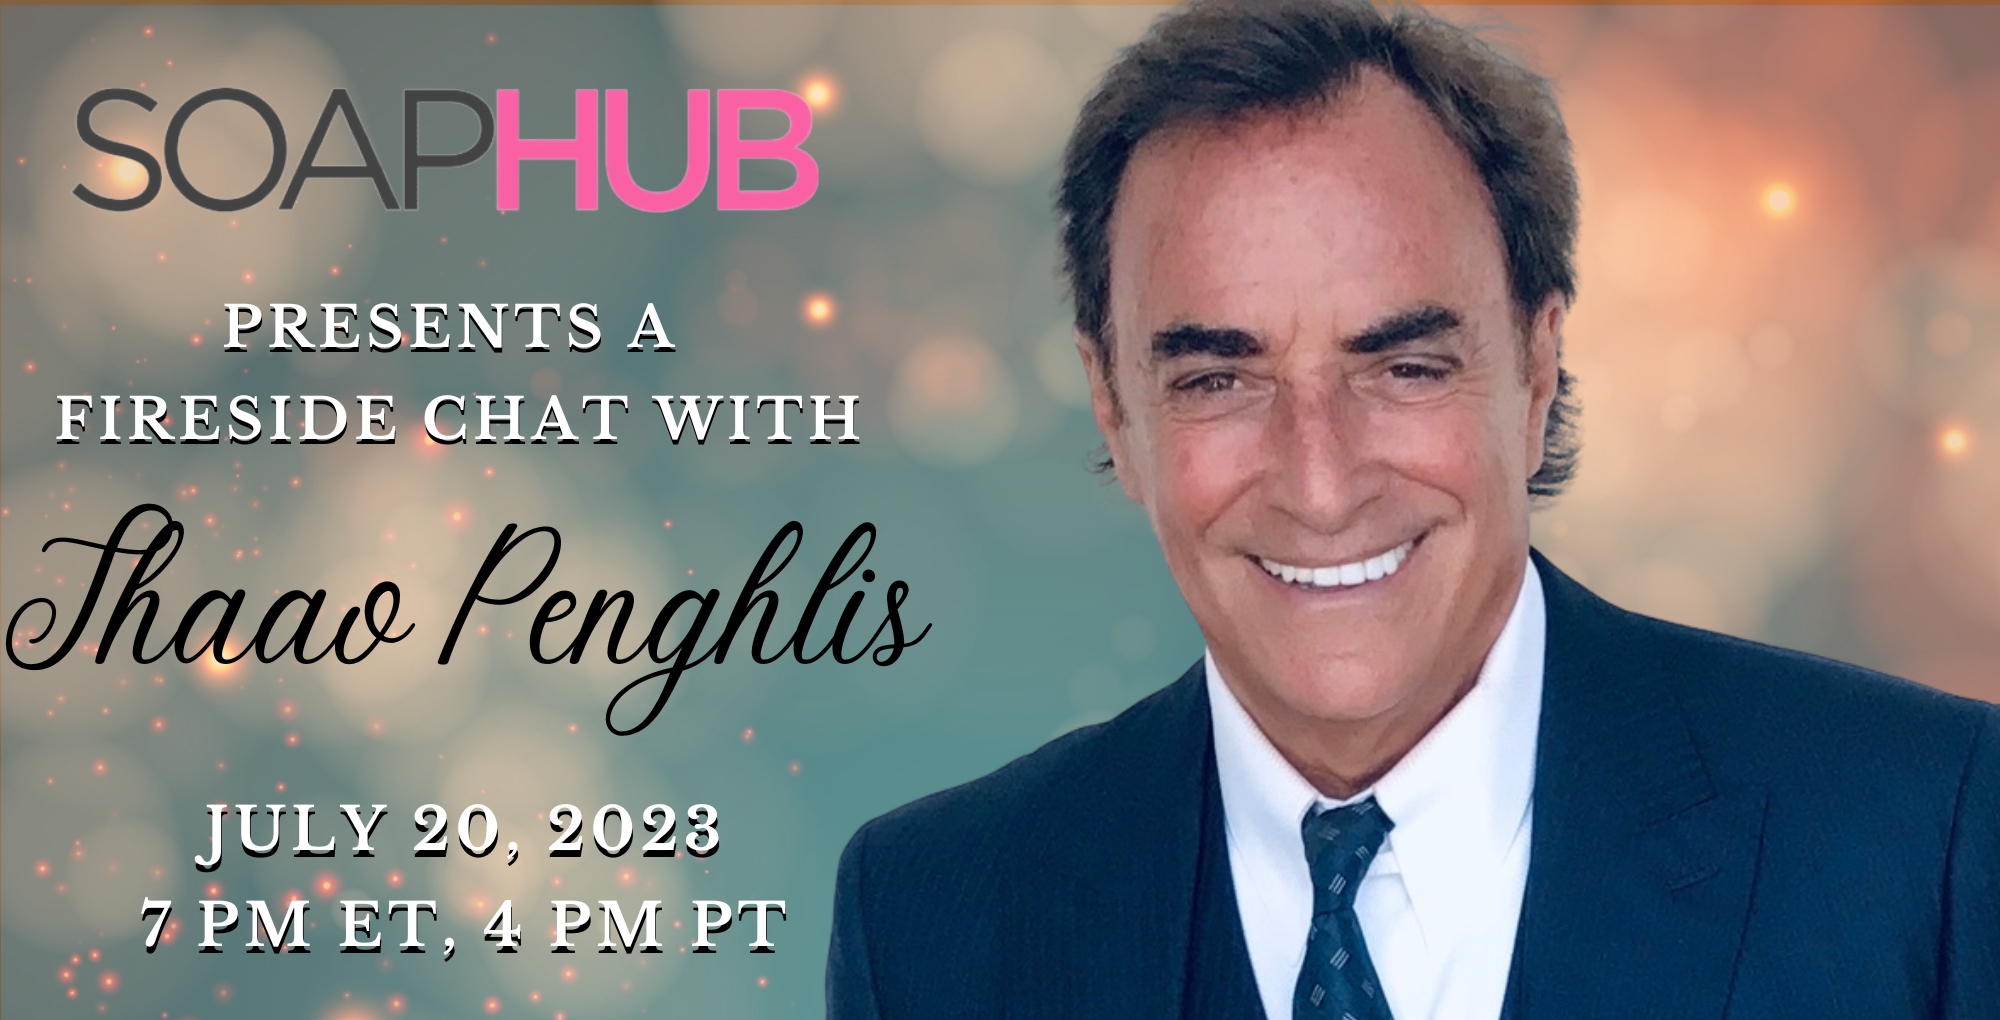 thaao penghlis from days of our lives for a fireside chat.